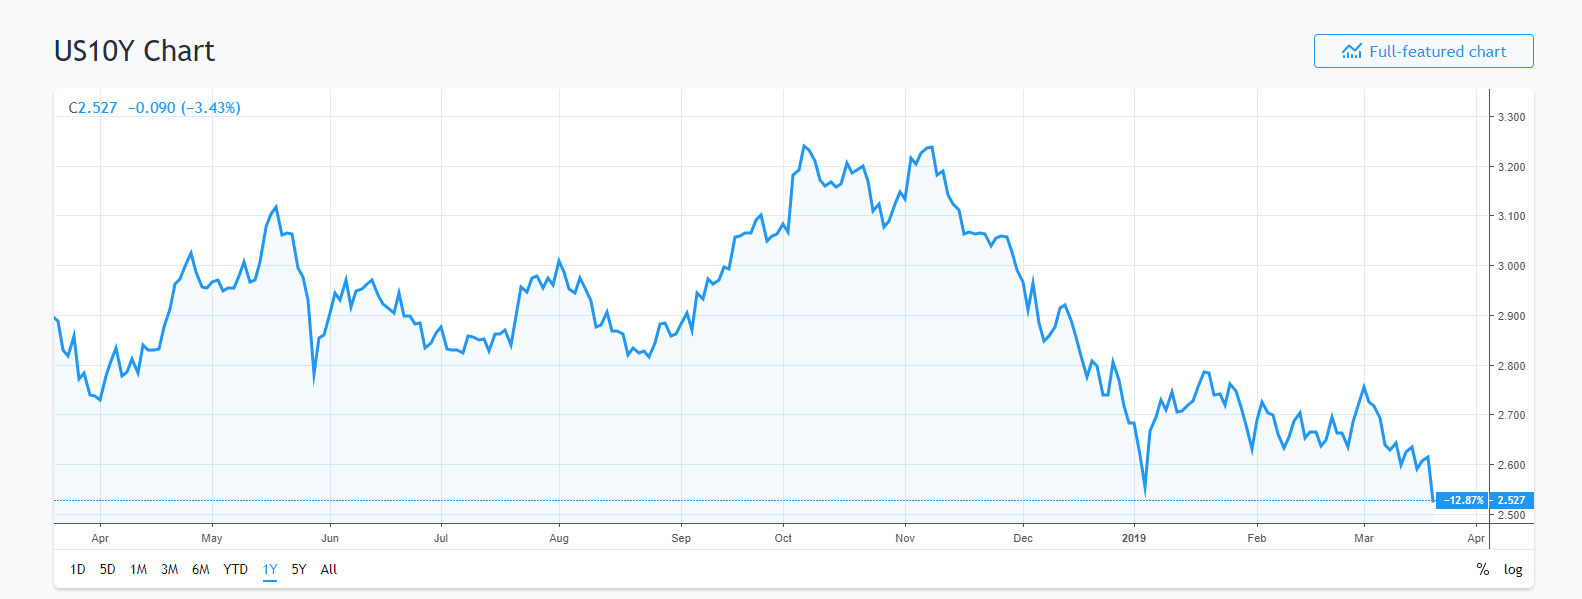 Trading View US Ten Year Bond Yield Chart - 21 March 2019